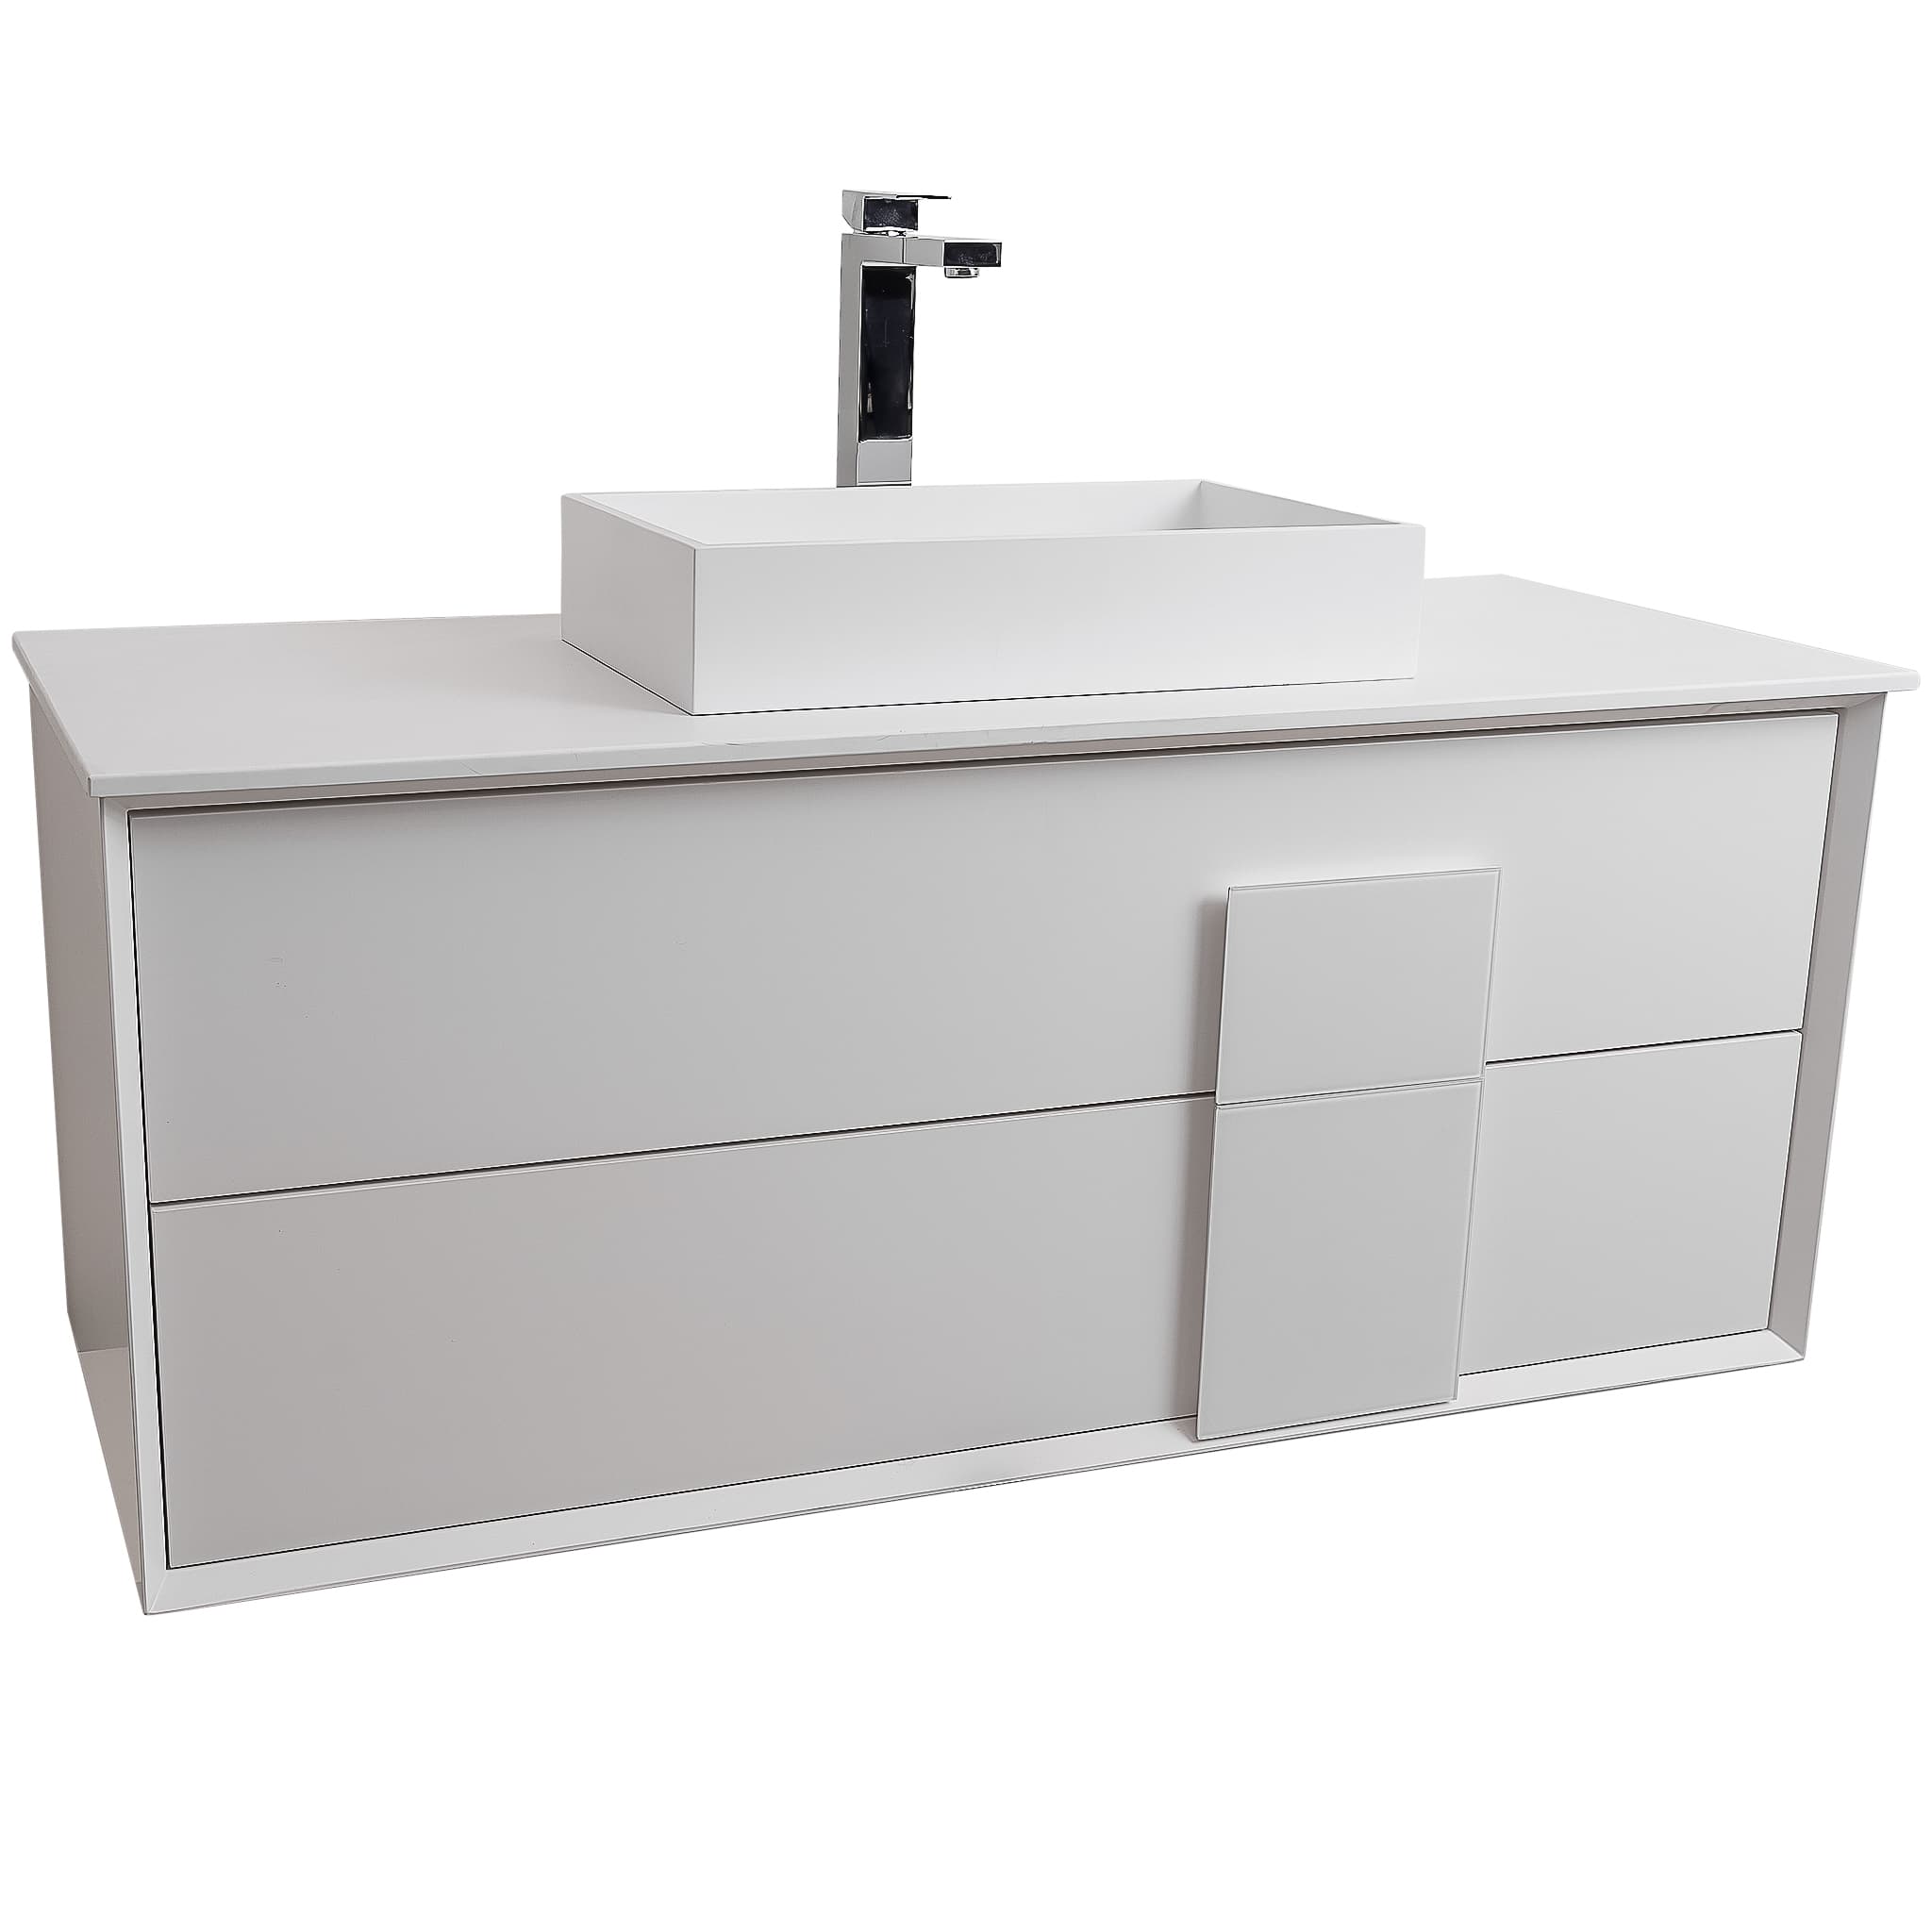 Piazza 47.5 Matte White With White Handle Cabinet, Solid Surface Flat White Counter and Infinity Square Solid Surface White Basin 1329, Wall Mounted Modern Vanity Set